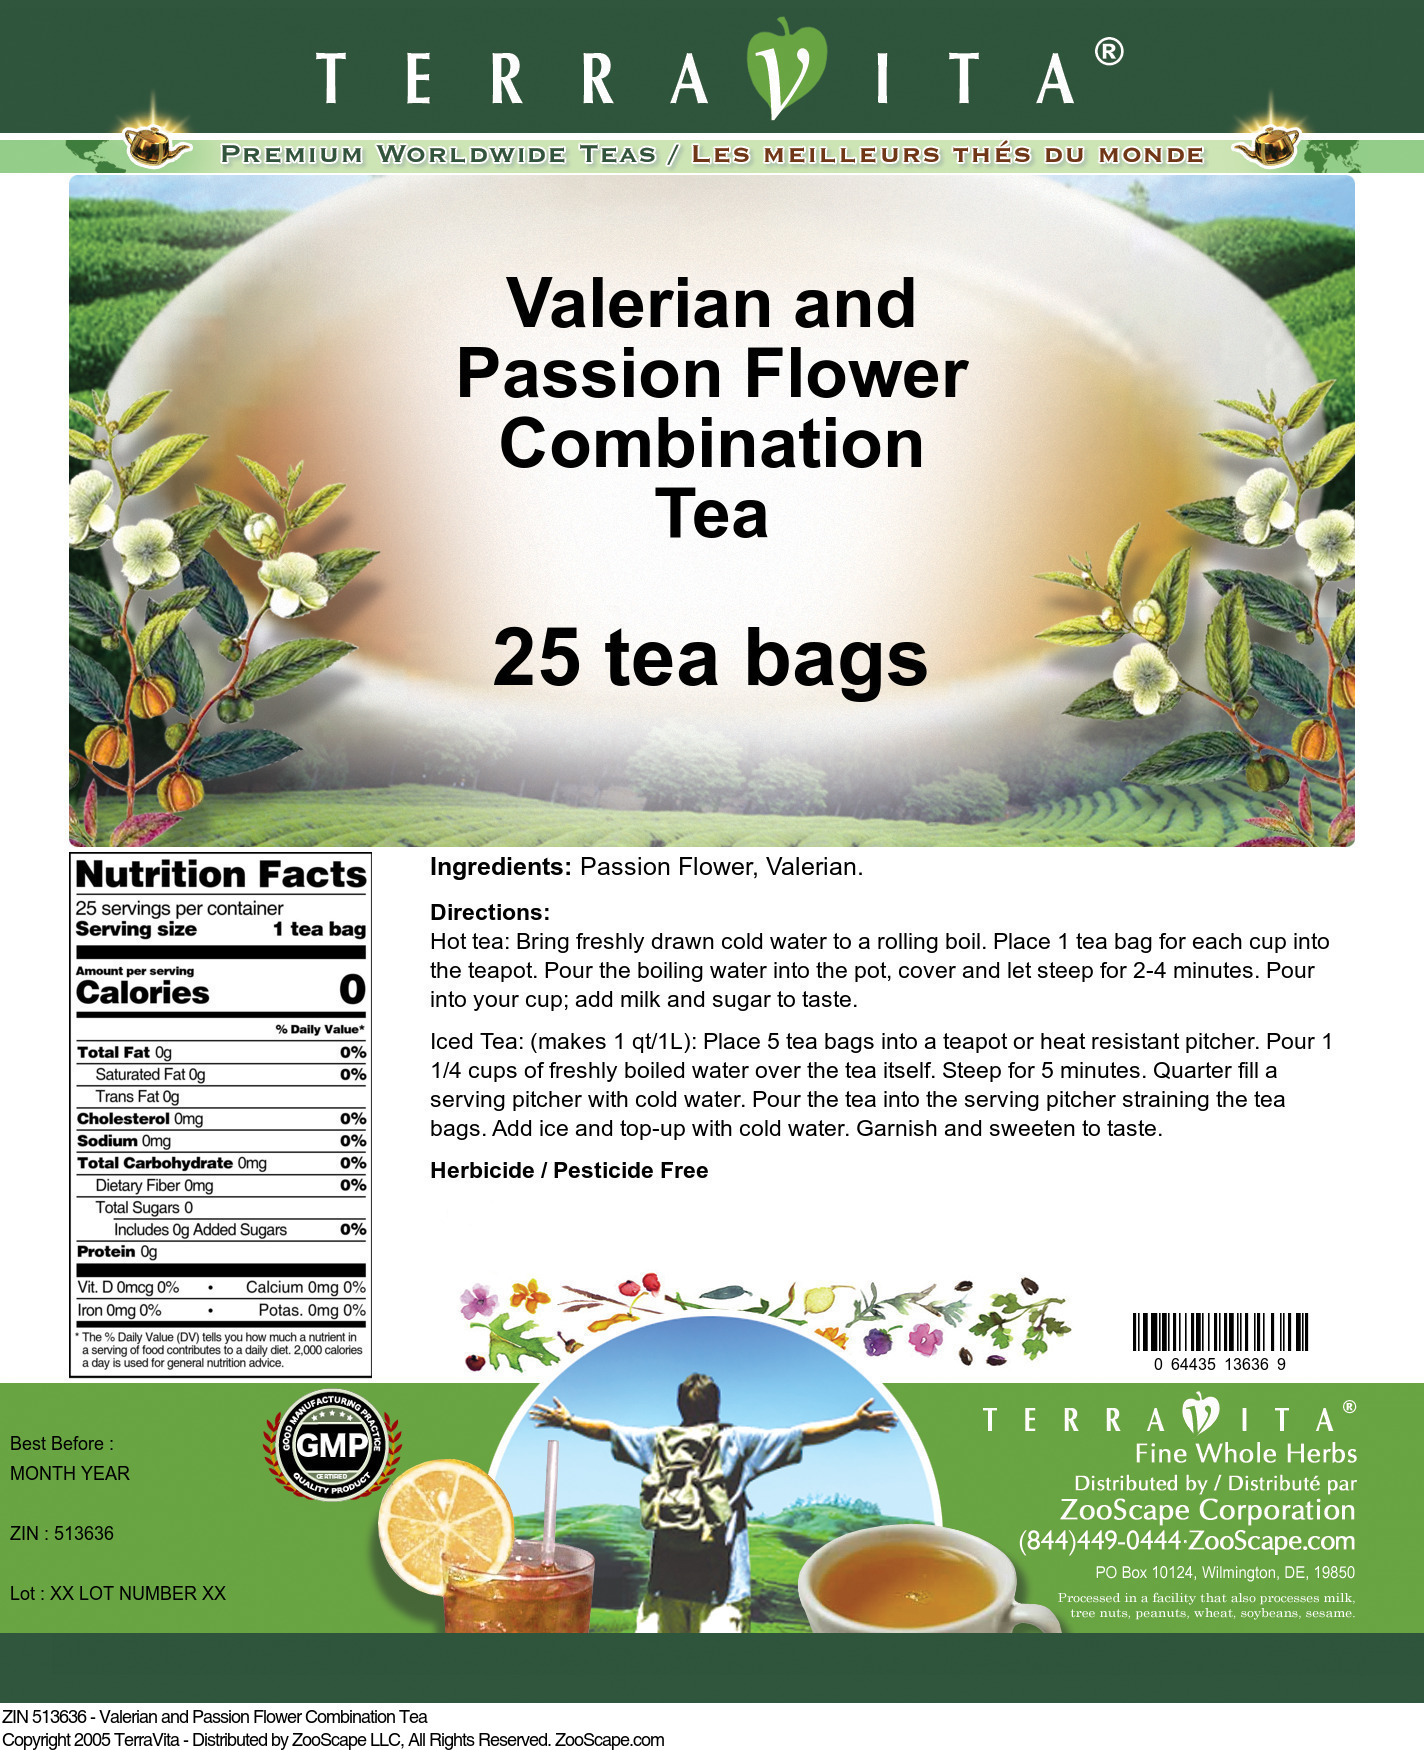 Valerian and Passion Flower Combination Tea - Label